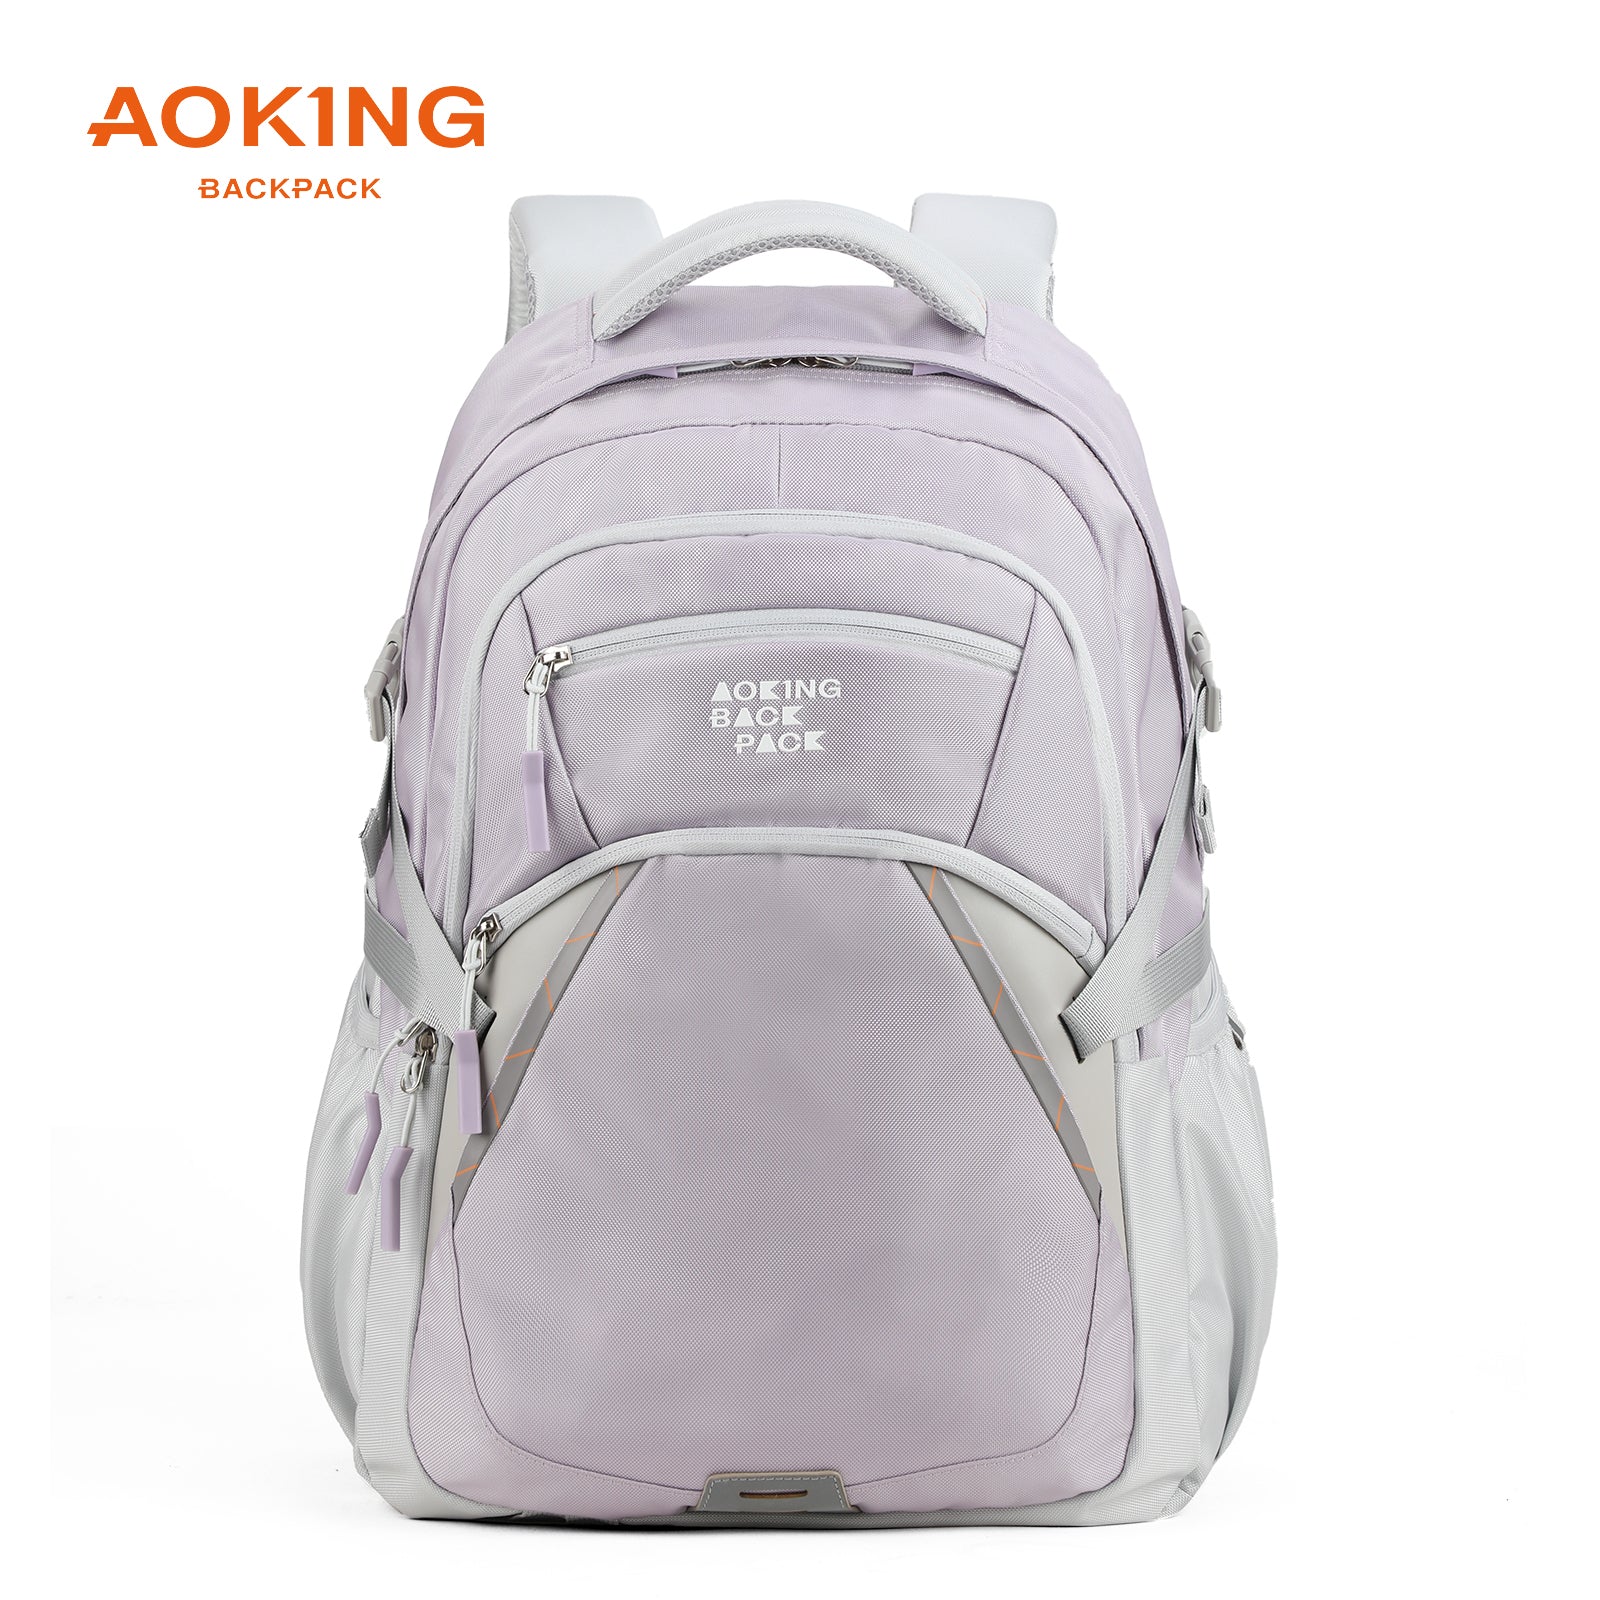 Aoking Backpack Casual Sport Backpack Student Bag XN2513